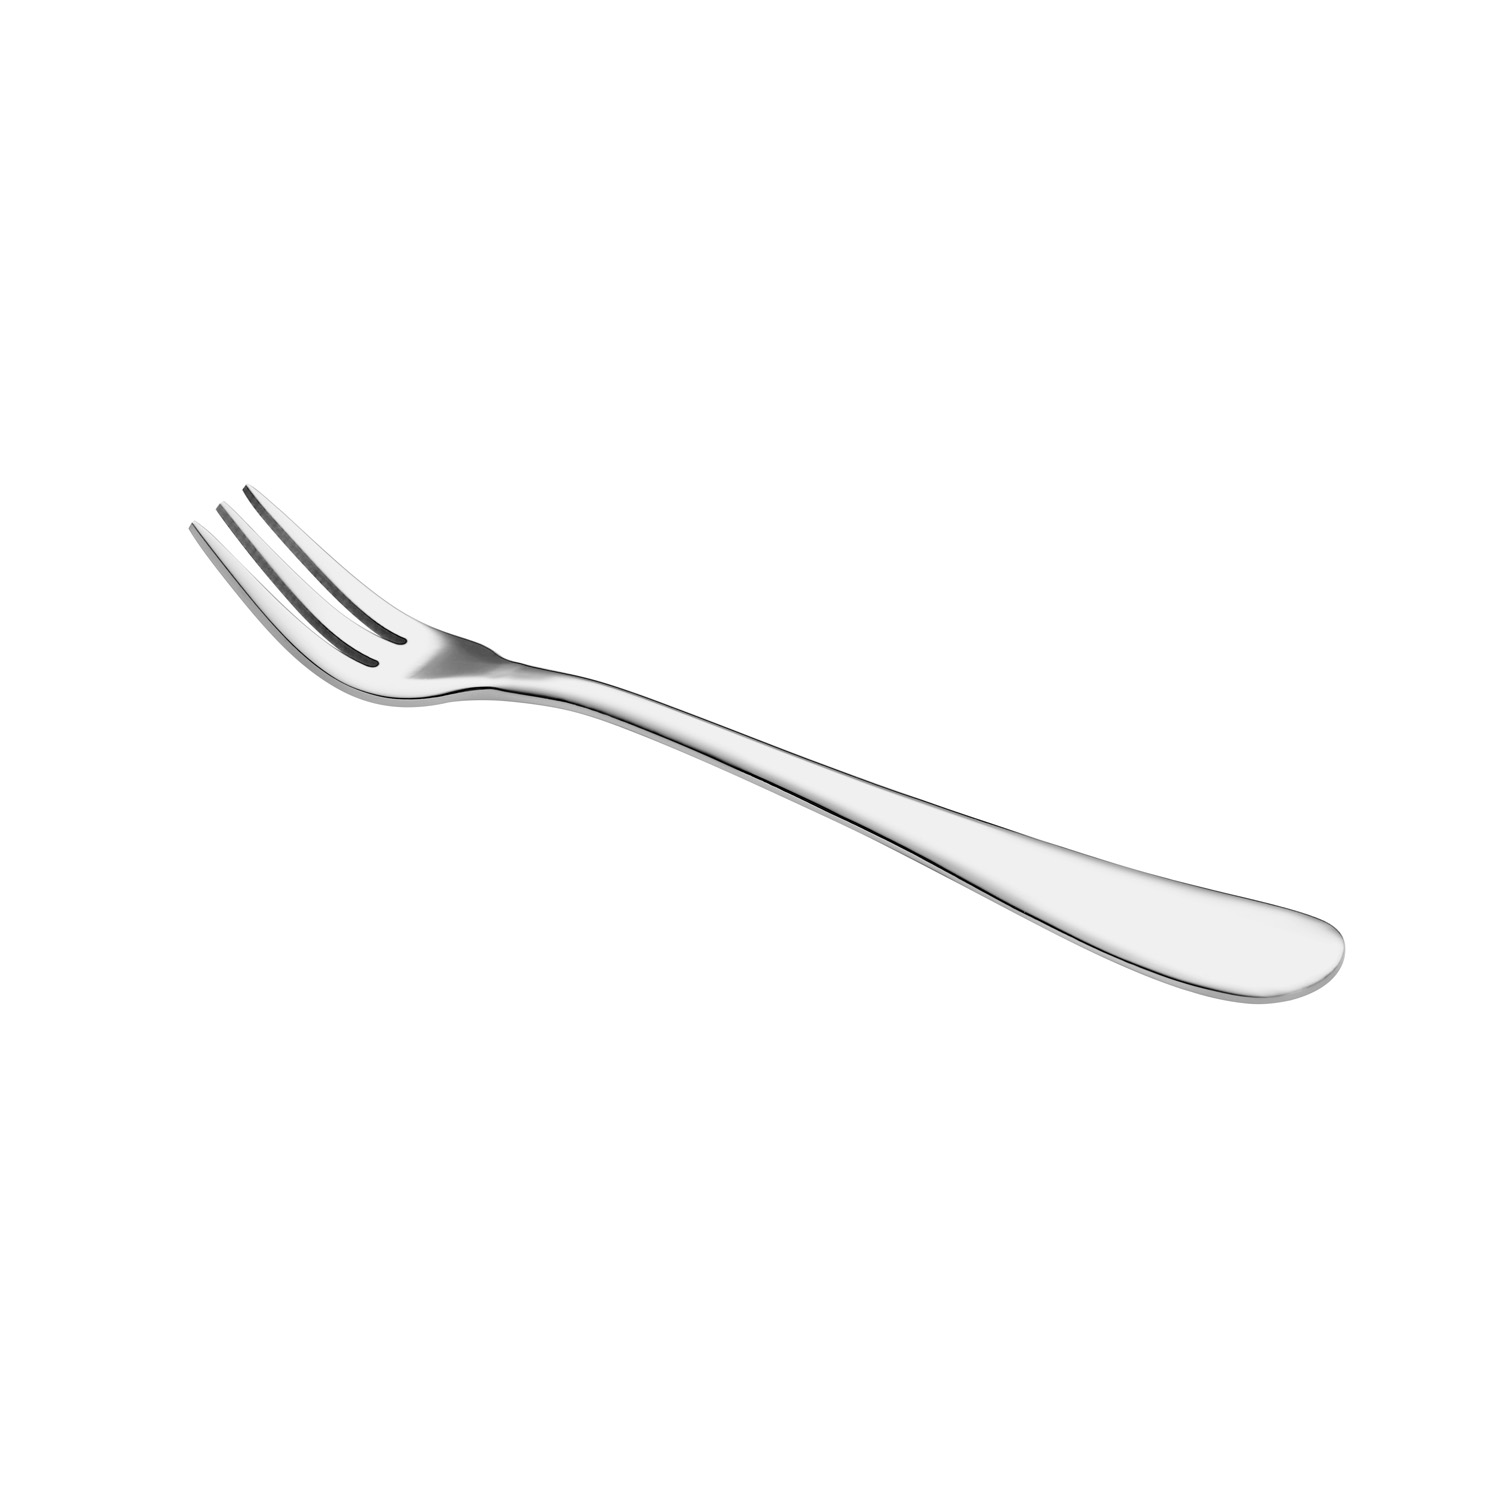 CAC China 8003-07 Noble Oyster Fork, Extra Heavyweight 18/8, 5 5/8"